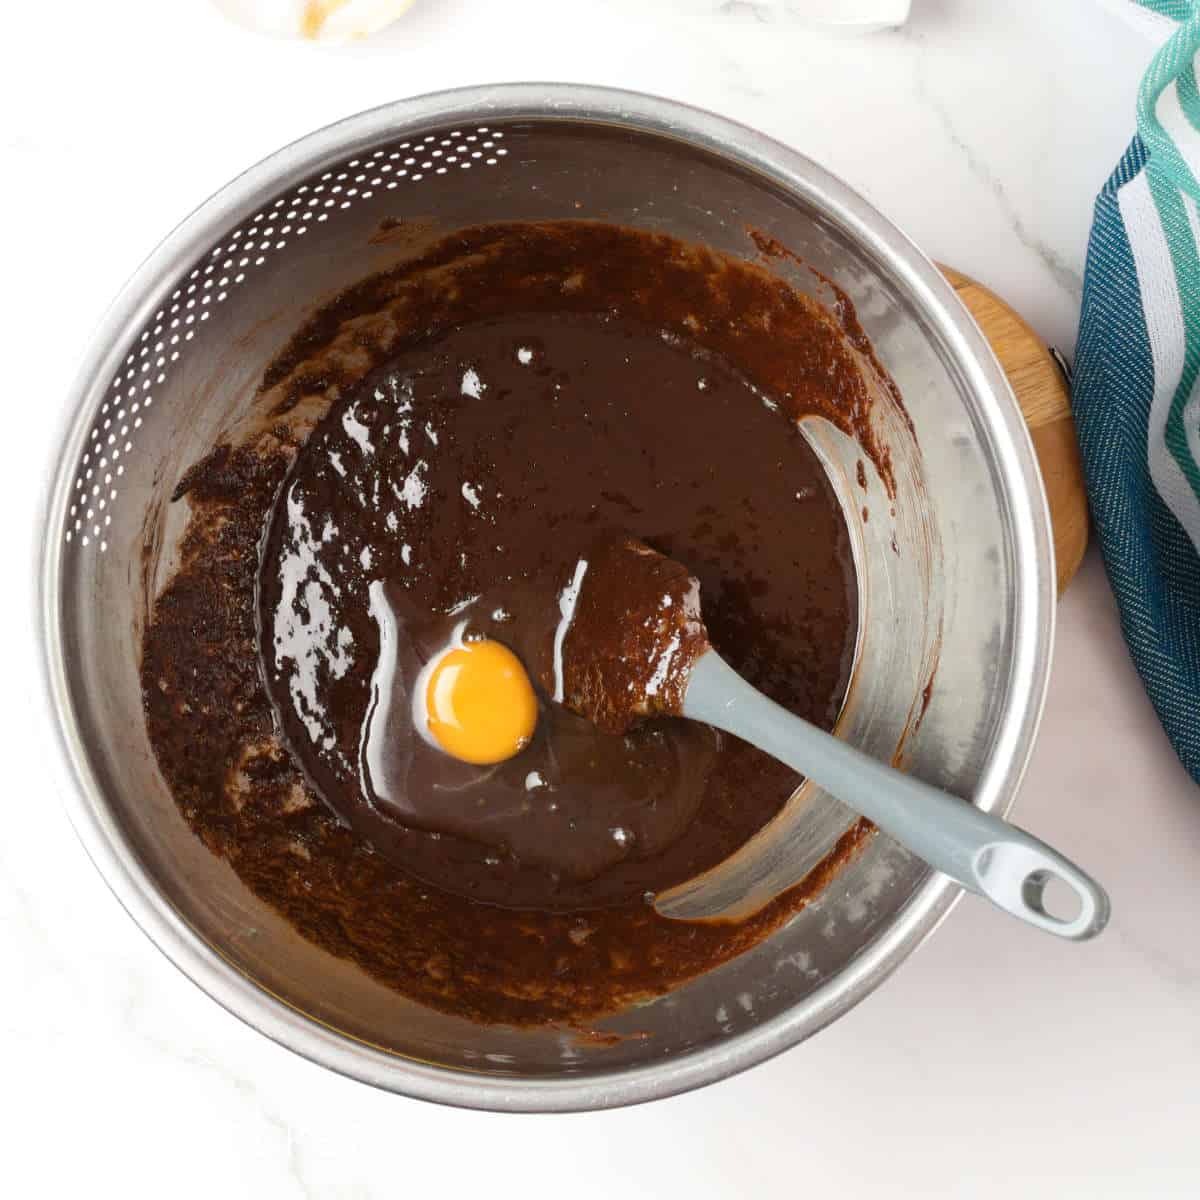 Melted chocolate and egg in a bowl.